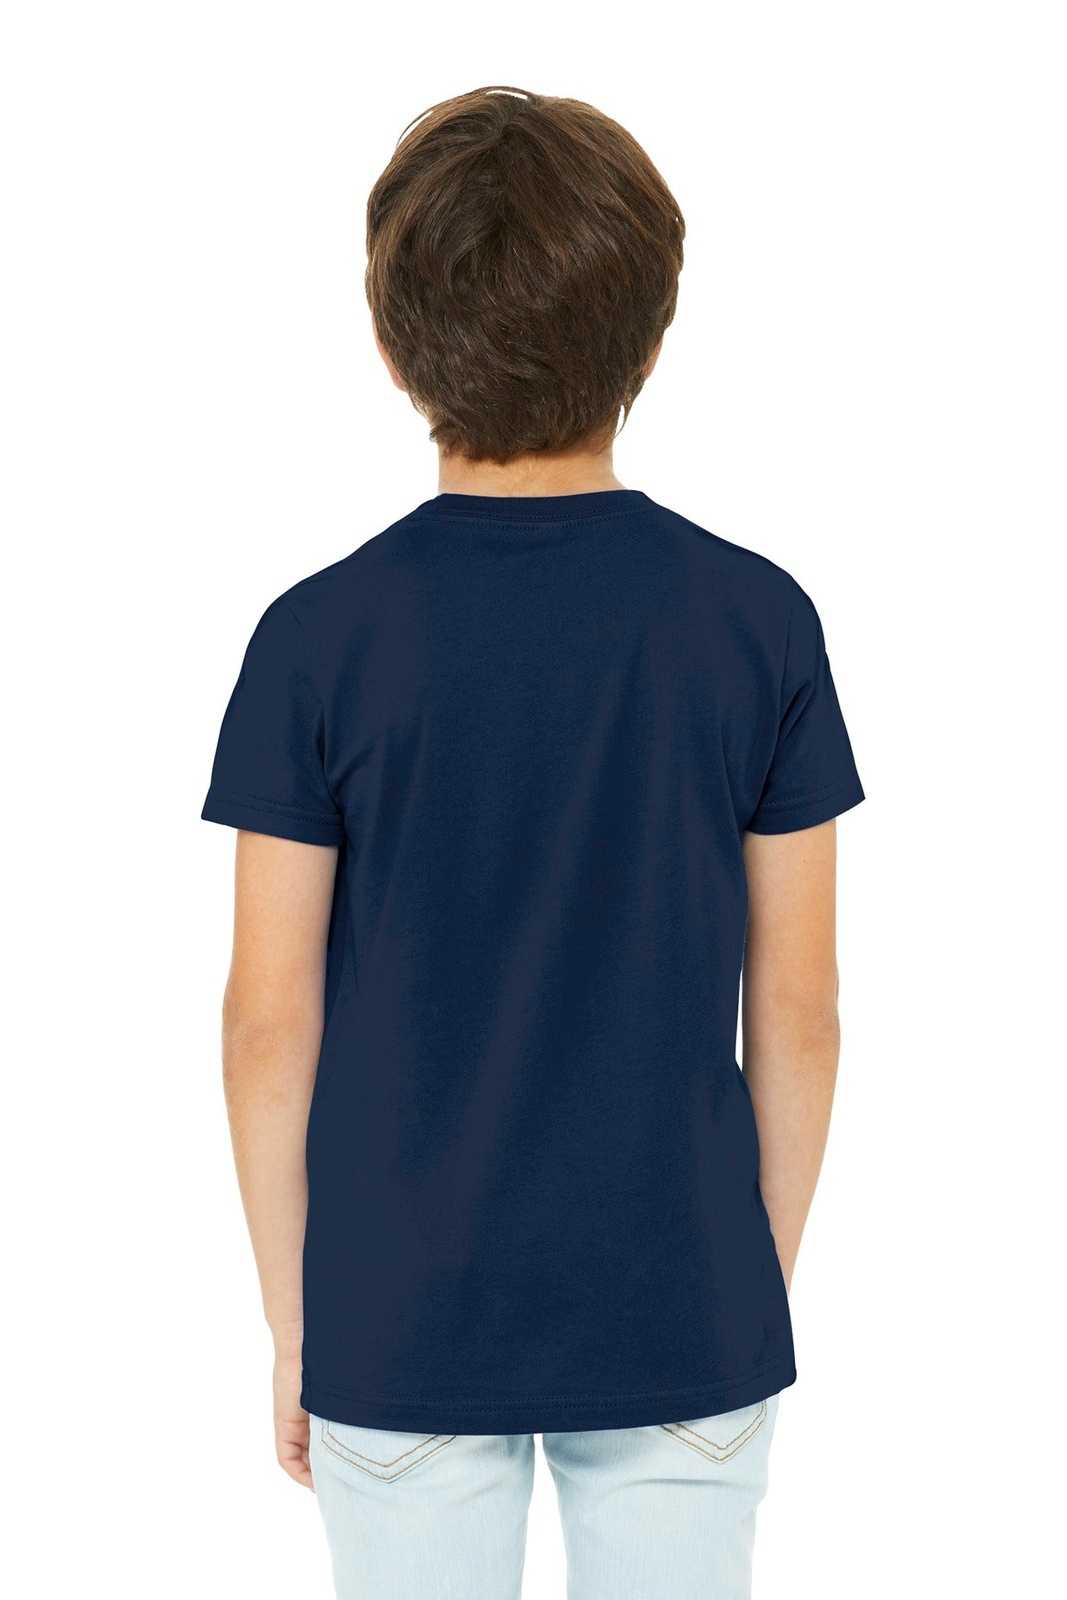 Bella + Canvas 3001Y Youth Jersey Short Sleeve Tee - Navy - HIT a Double